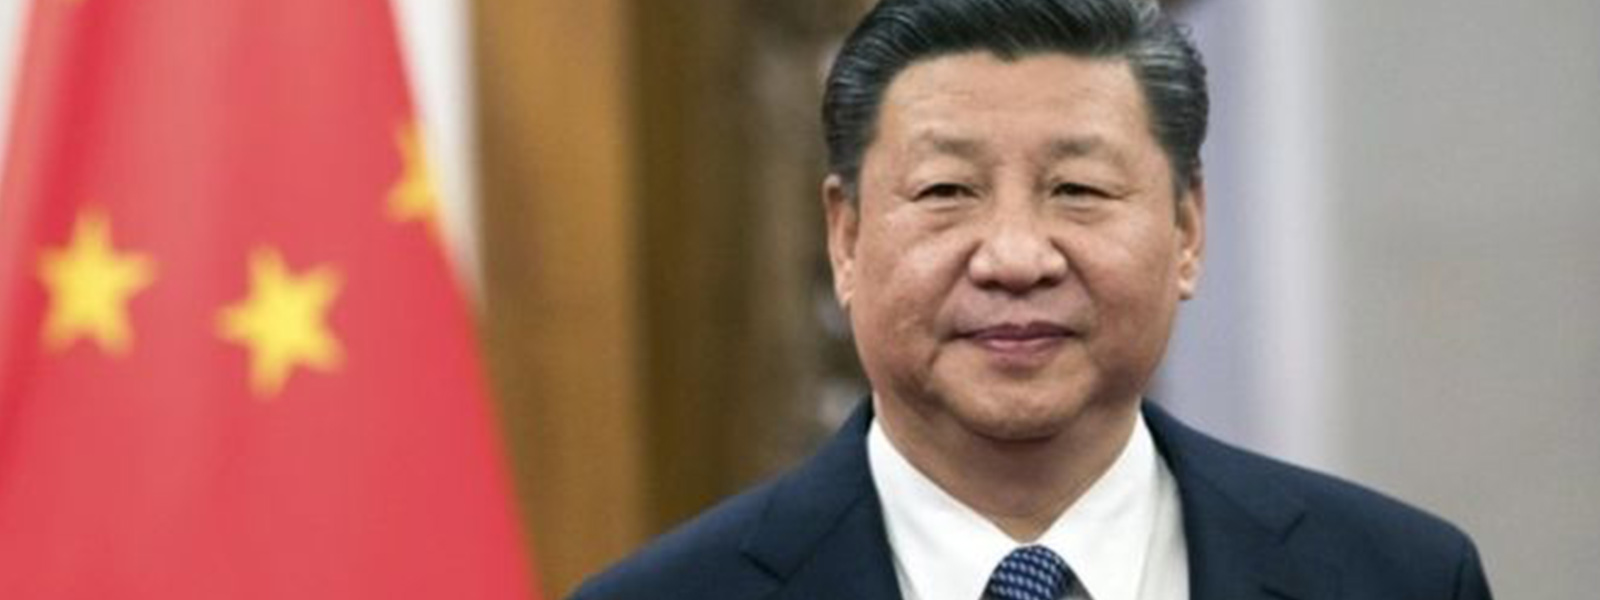 China sets stage for President Xi to stay in office indefinitely